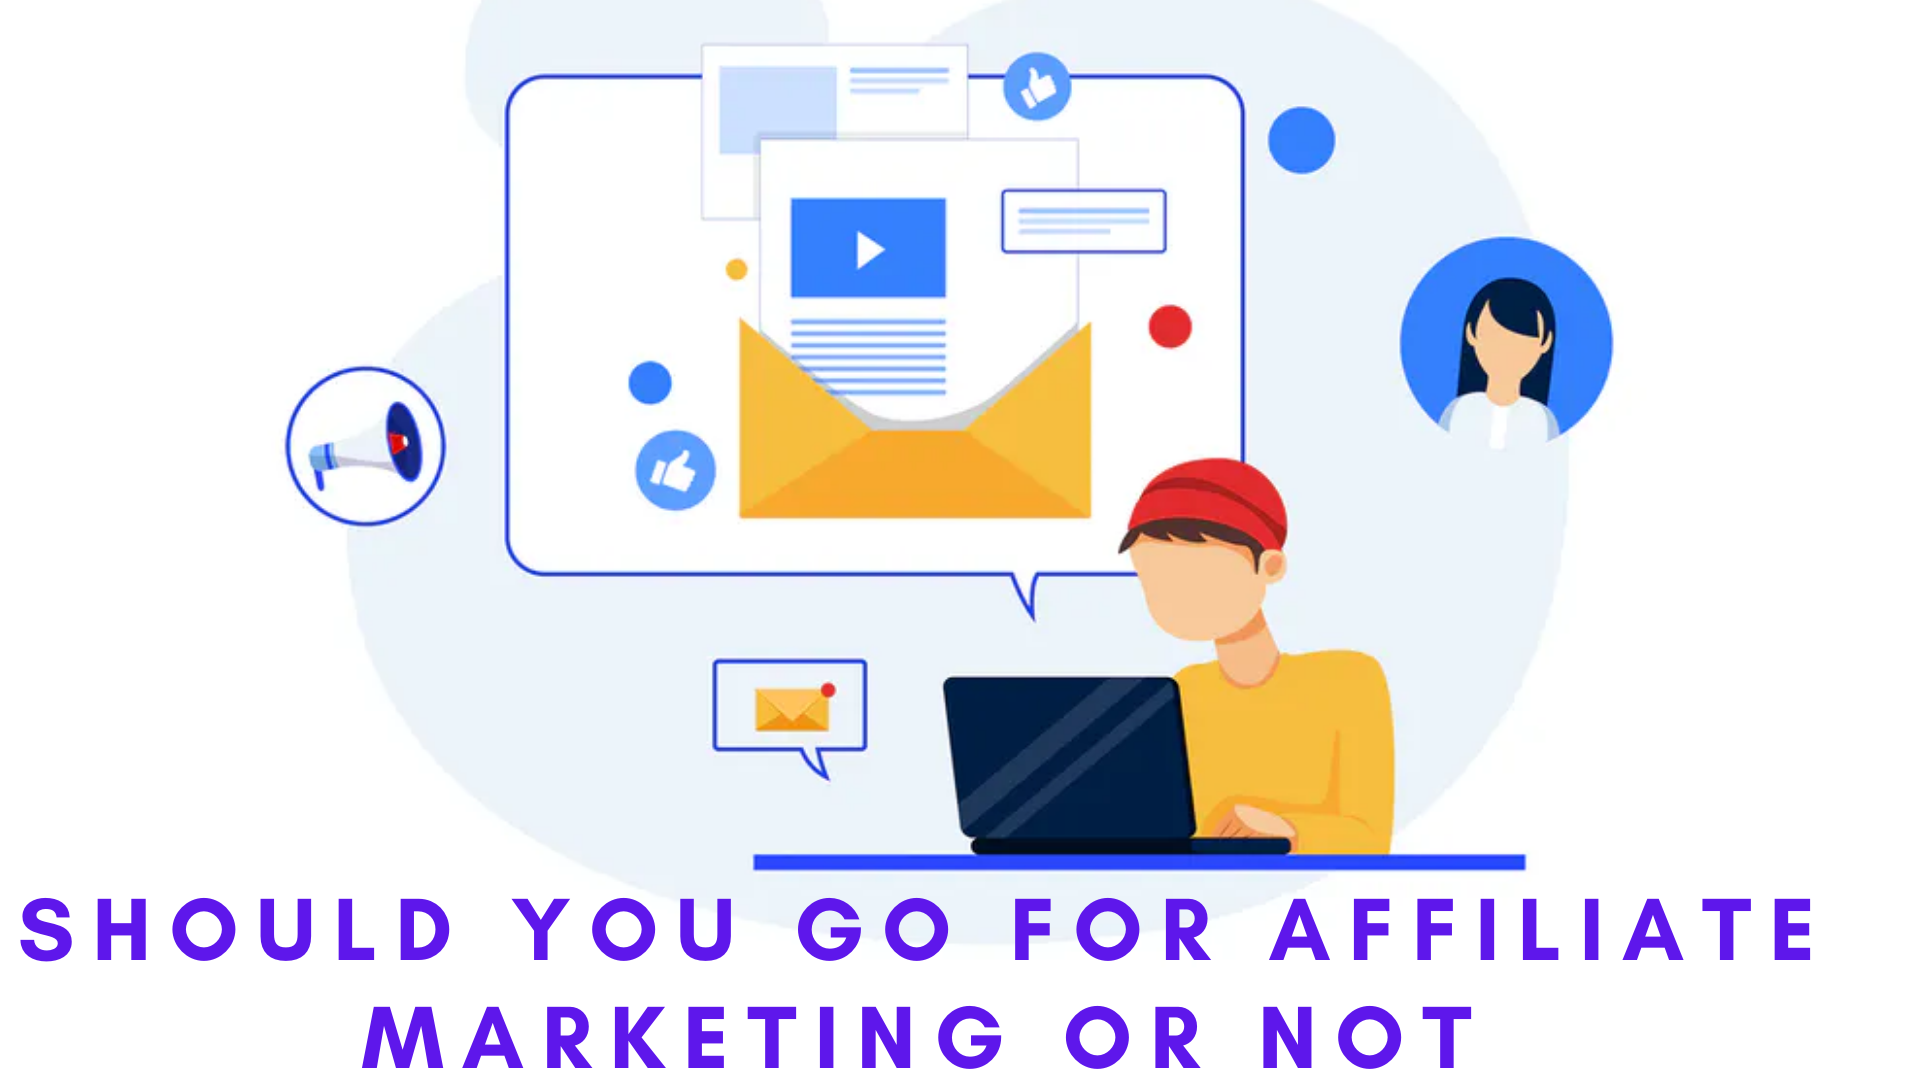 Should you go for affiliate marketing or not